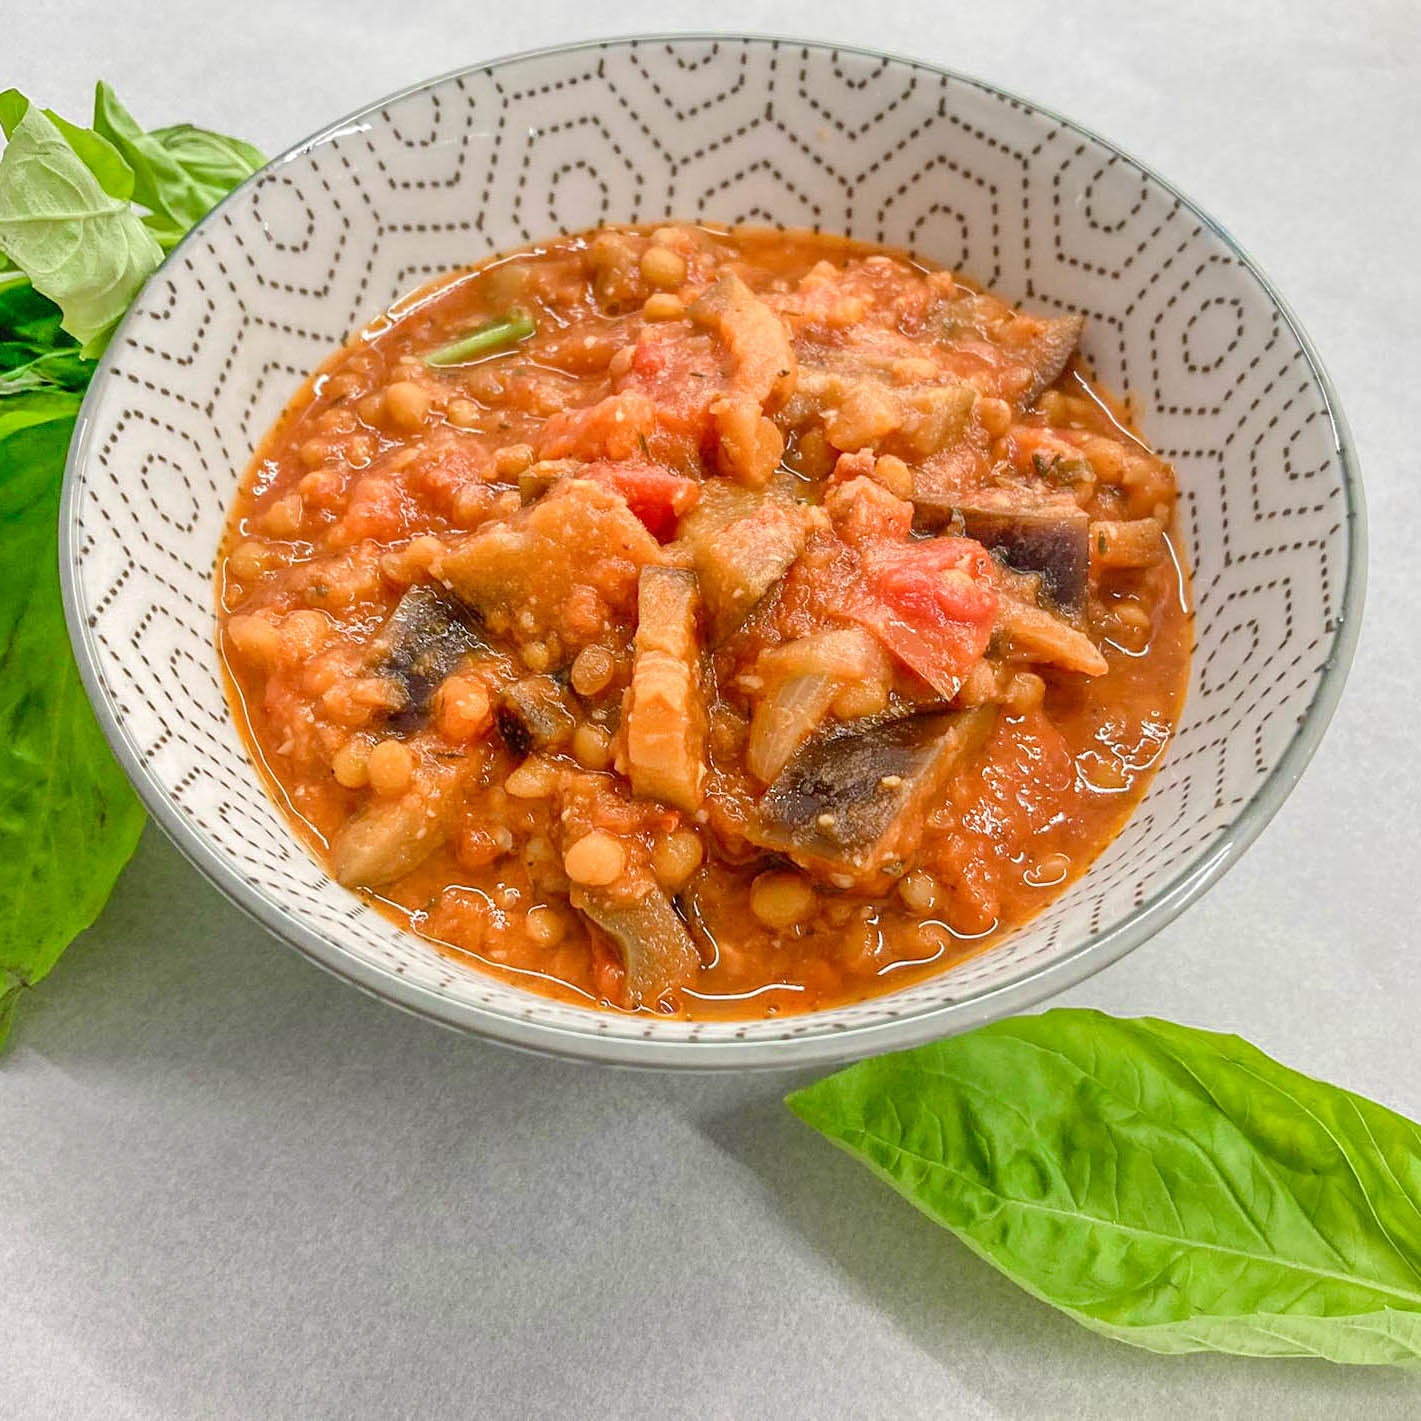 Lentils and eggplant stew